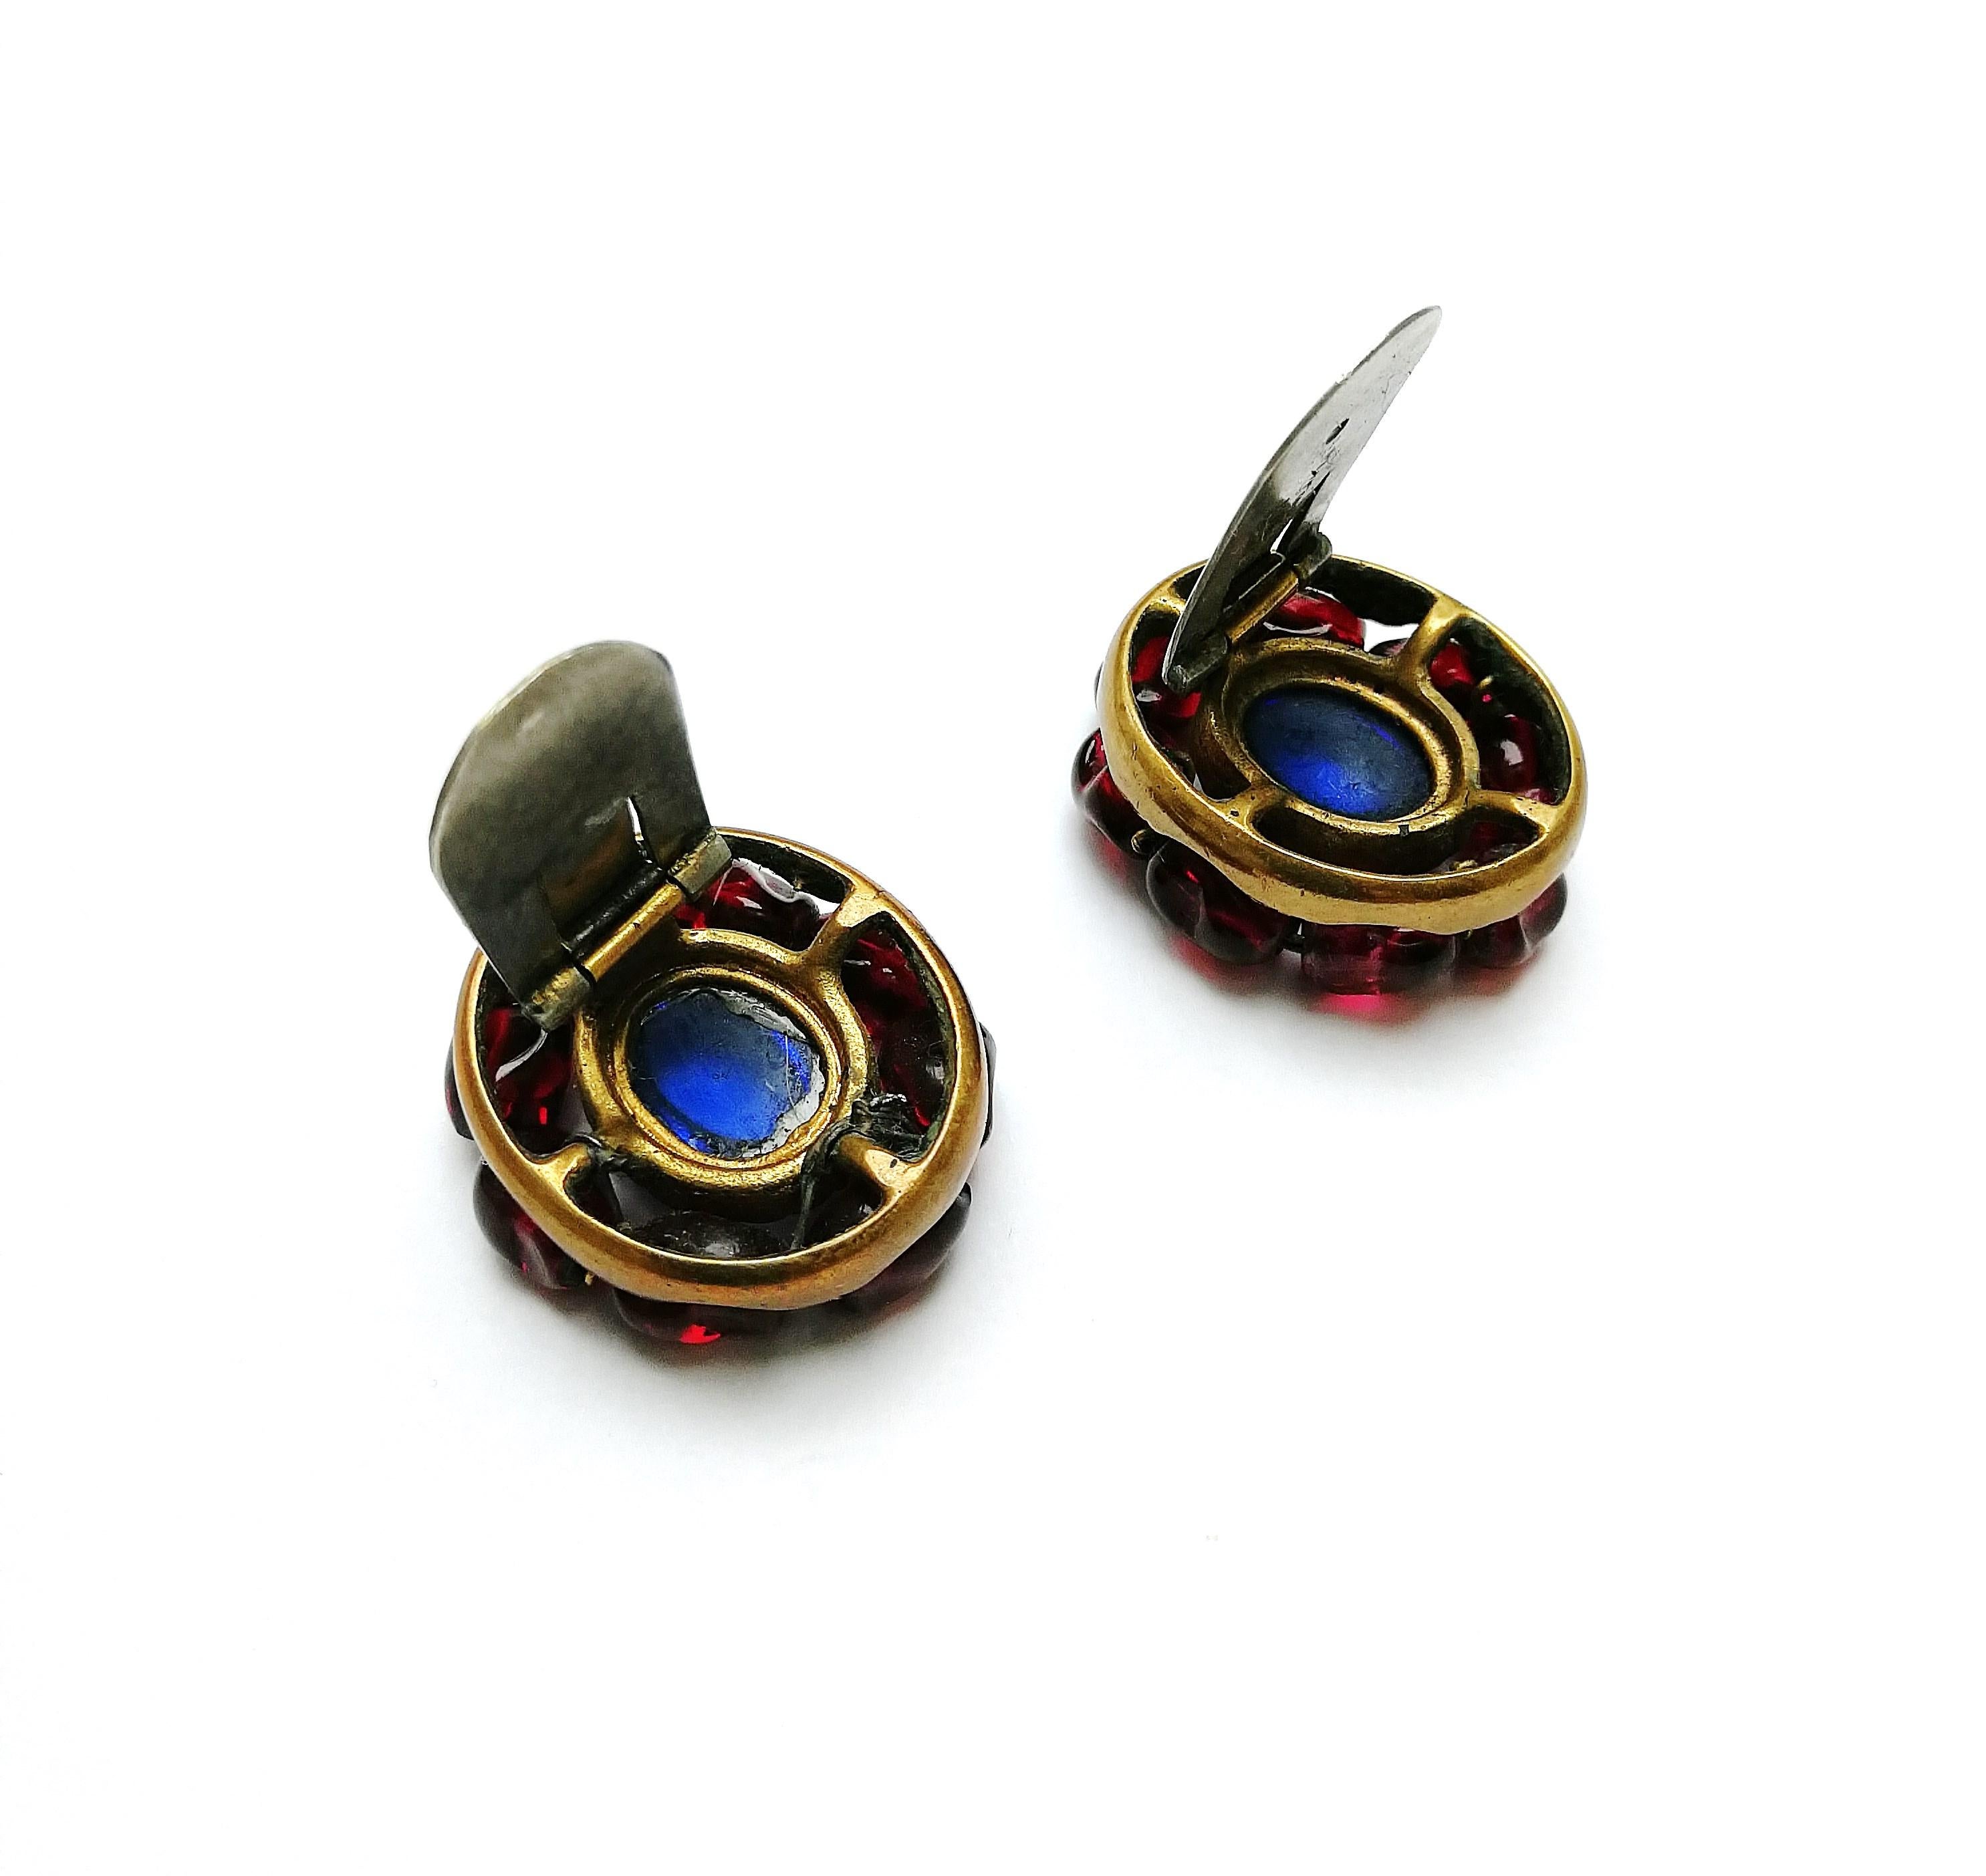 Ruby and sapphire poured glass earrings, att. Maison Gripoix for Chanel, 1930s. 1